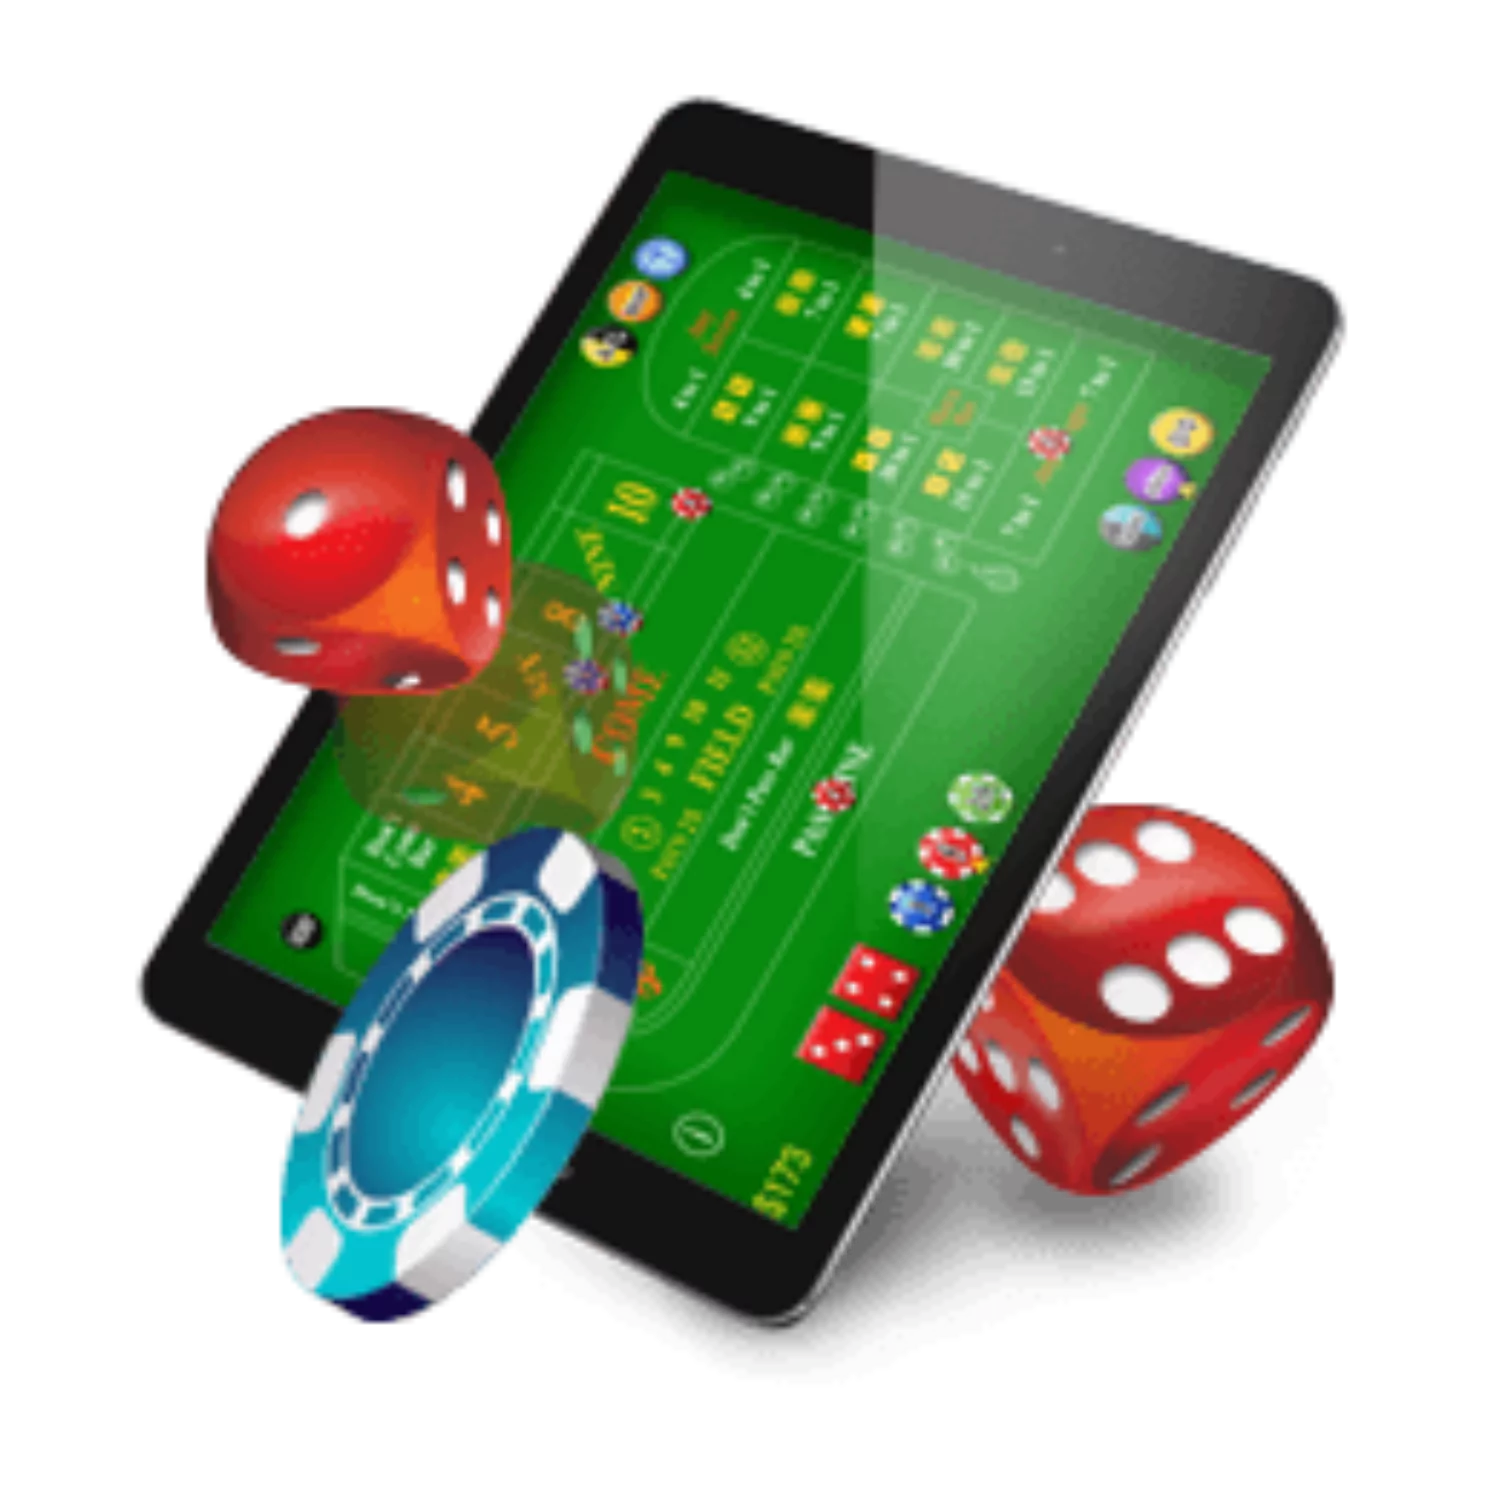 Sign up for an online casino and play craps via your mobile phone or laptop.